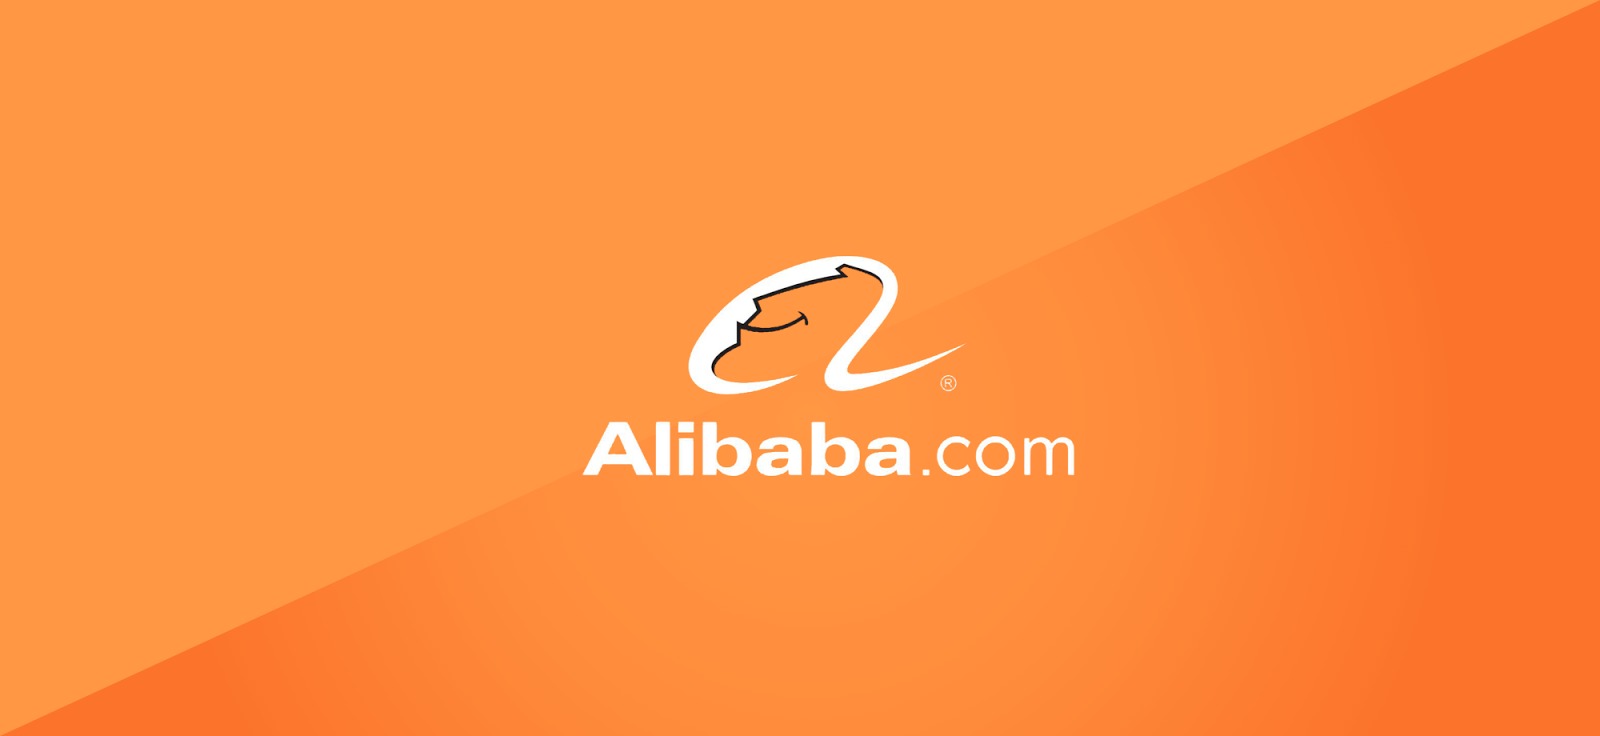 E-commerce Giant Alibaba Introduces New NFT Marketplace With Copyright Policies